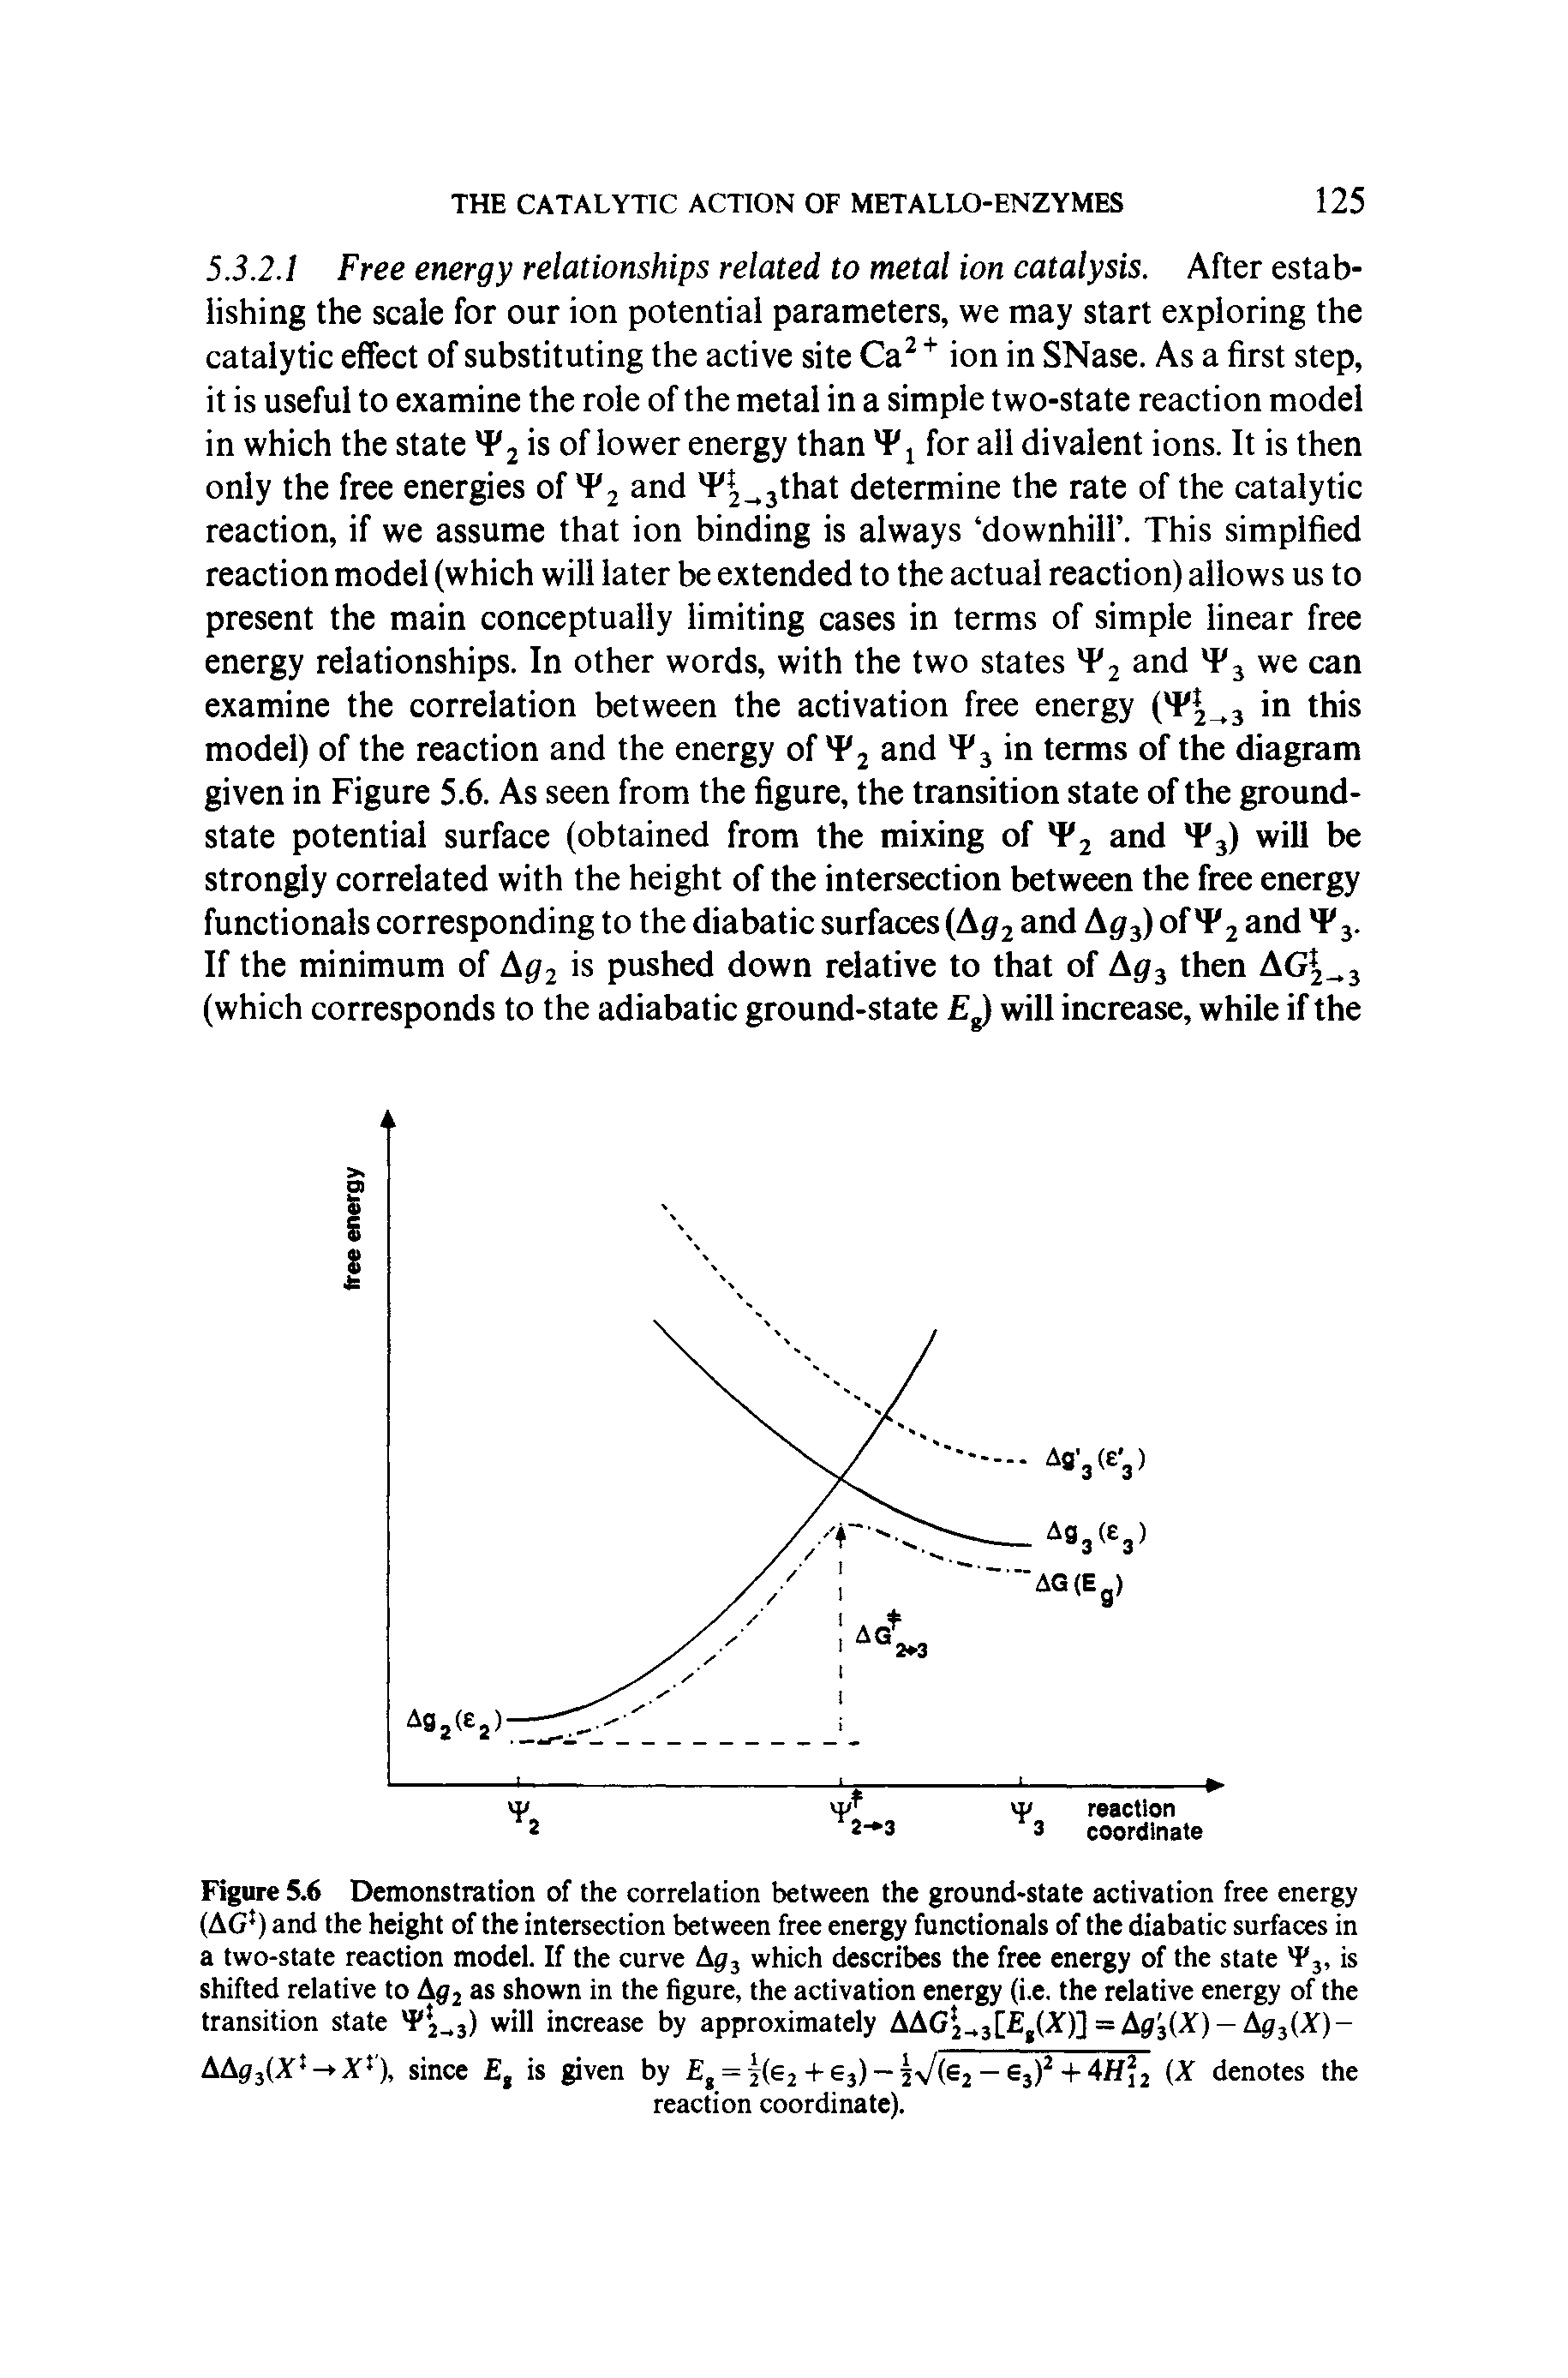 Figure 5.6 Demonstration of the correlation between the ground-state activation free energy (AG ) and the height of the intersection between free energy functionals of the diabatic surfaces in a two-state reaction model. If the curve Ajj which describes the free energy of the state Fj, is shifted relative to A92 as shown in the figure, the activation energy (i.e. the relative energy of the transition state 2-3) will increase by approximately AAG2-.3[ ,(X)]=Ap3(X) — A3j(X)-...